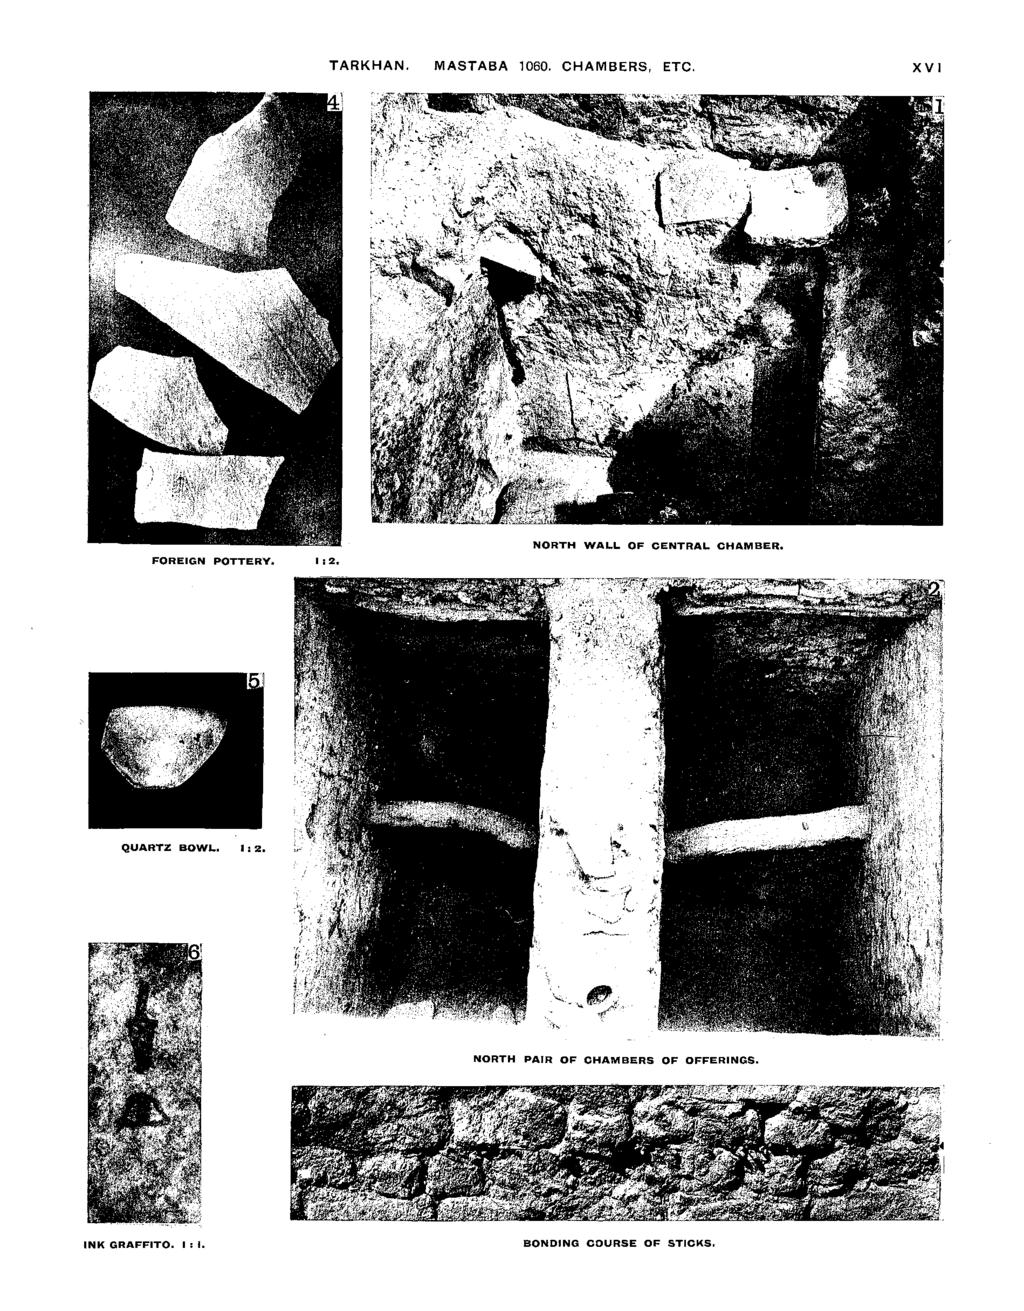 TARKHAN. MASTABA 1060. CHAMBERS, ETC. XVI FOREIGN POTTERY. 1:Z. NORTH WALL OF CENTRAL CHAMBER.